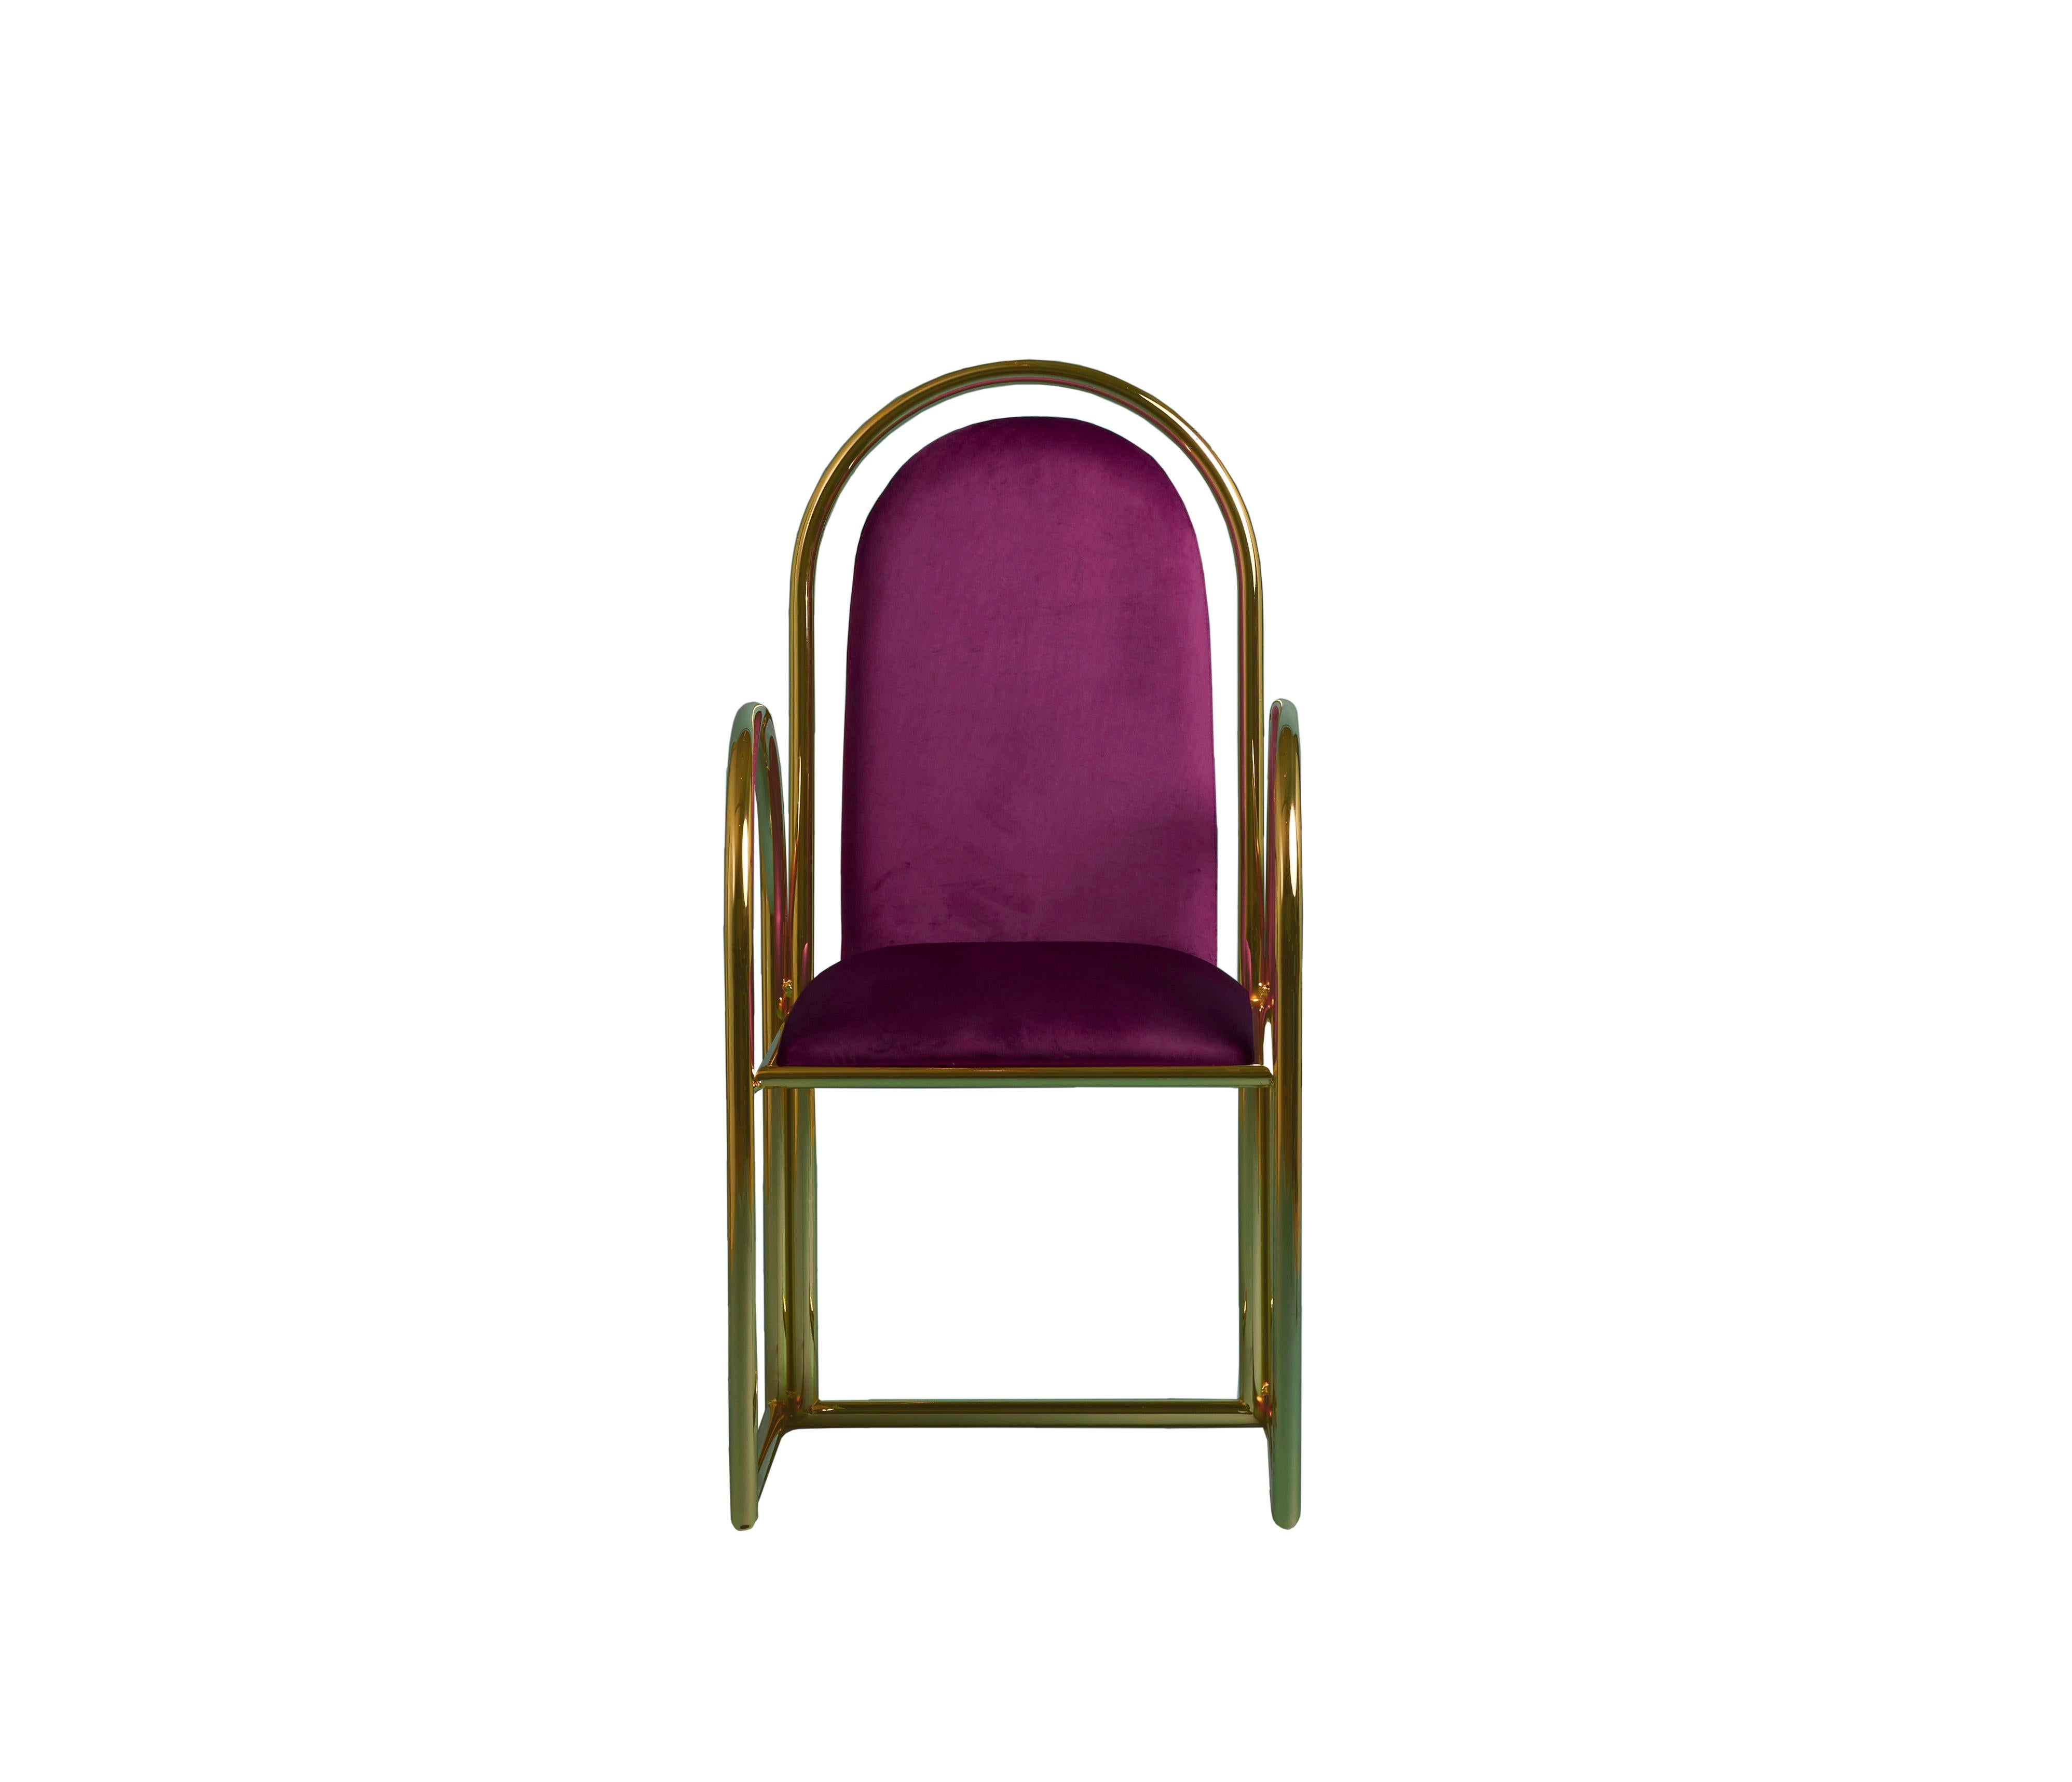 Spanish Arco Chair by Houtique